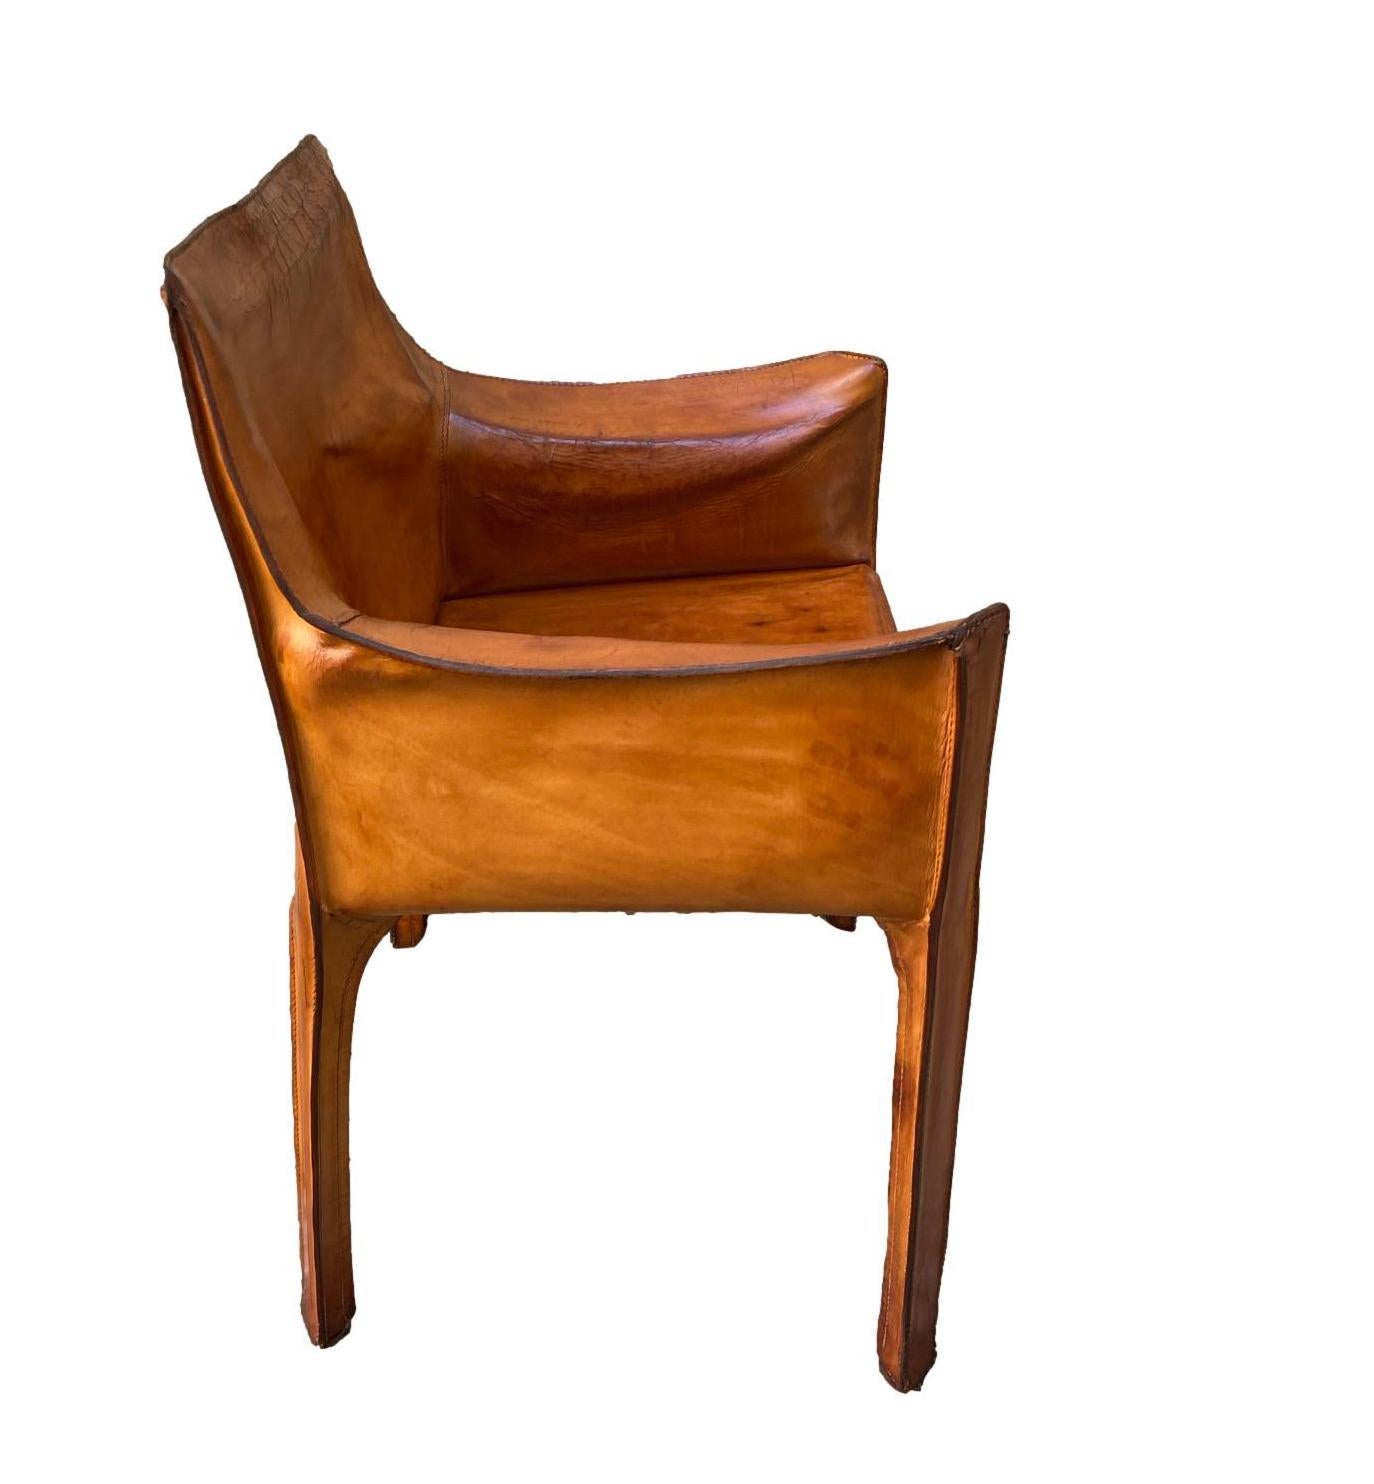 Italian Mario Bellini for Cassina Leather Cab Lounge Chair, Italy, 1970s